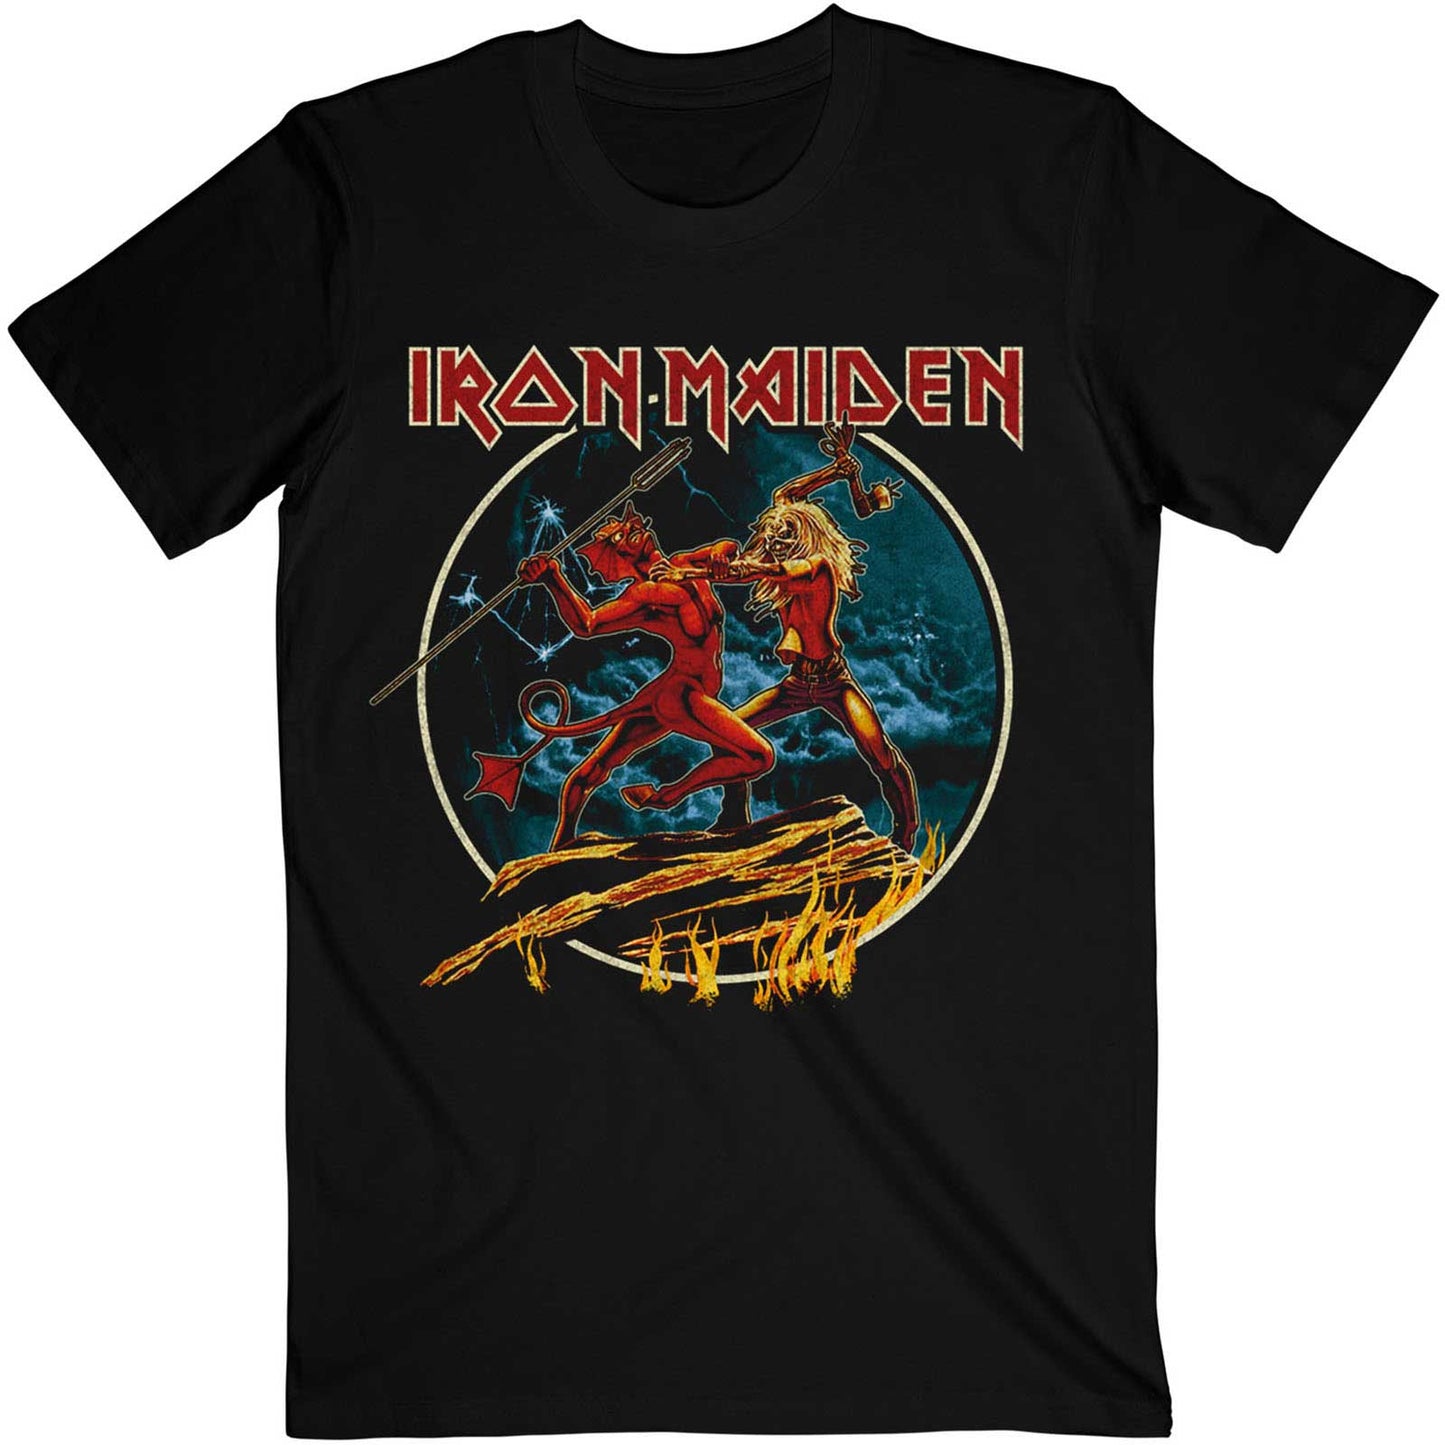 IRON MAIDEN - Number of the beast/ Run to the hills circular T-SHIRT